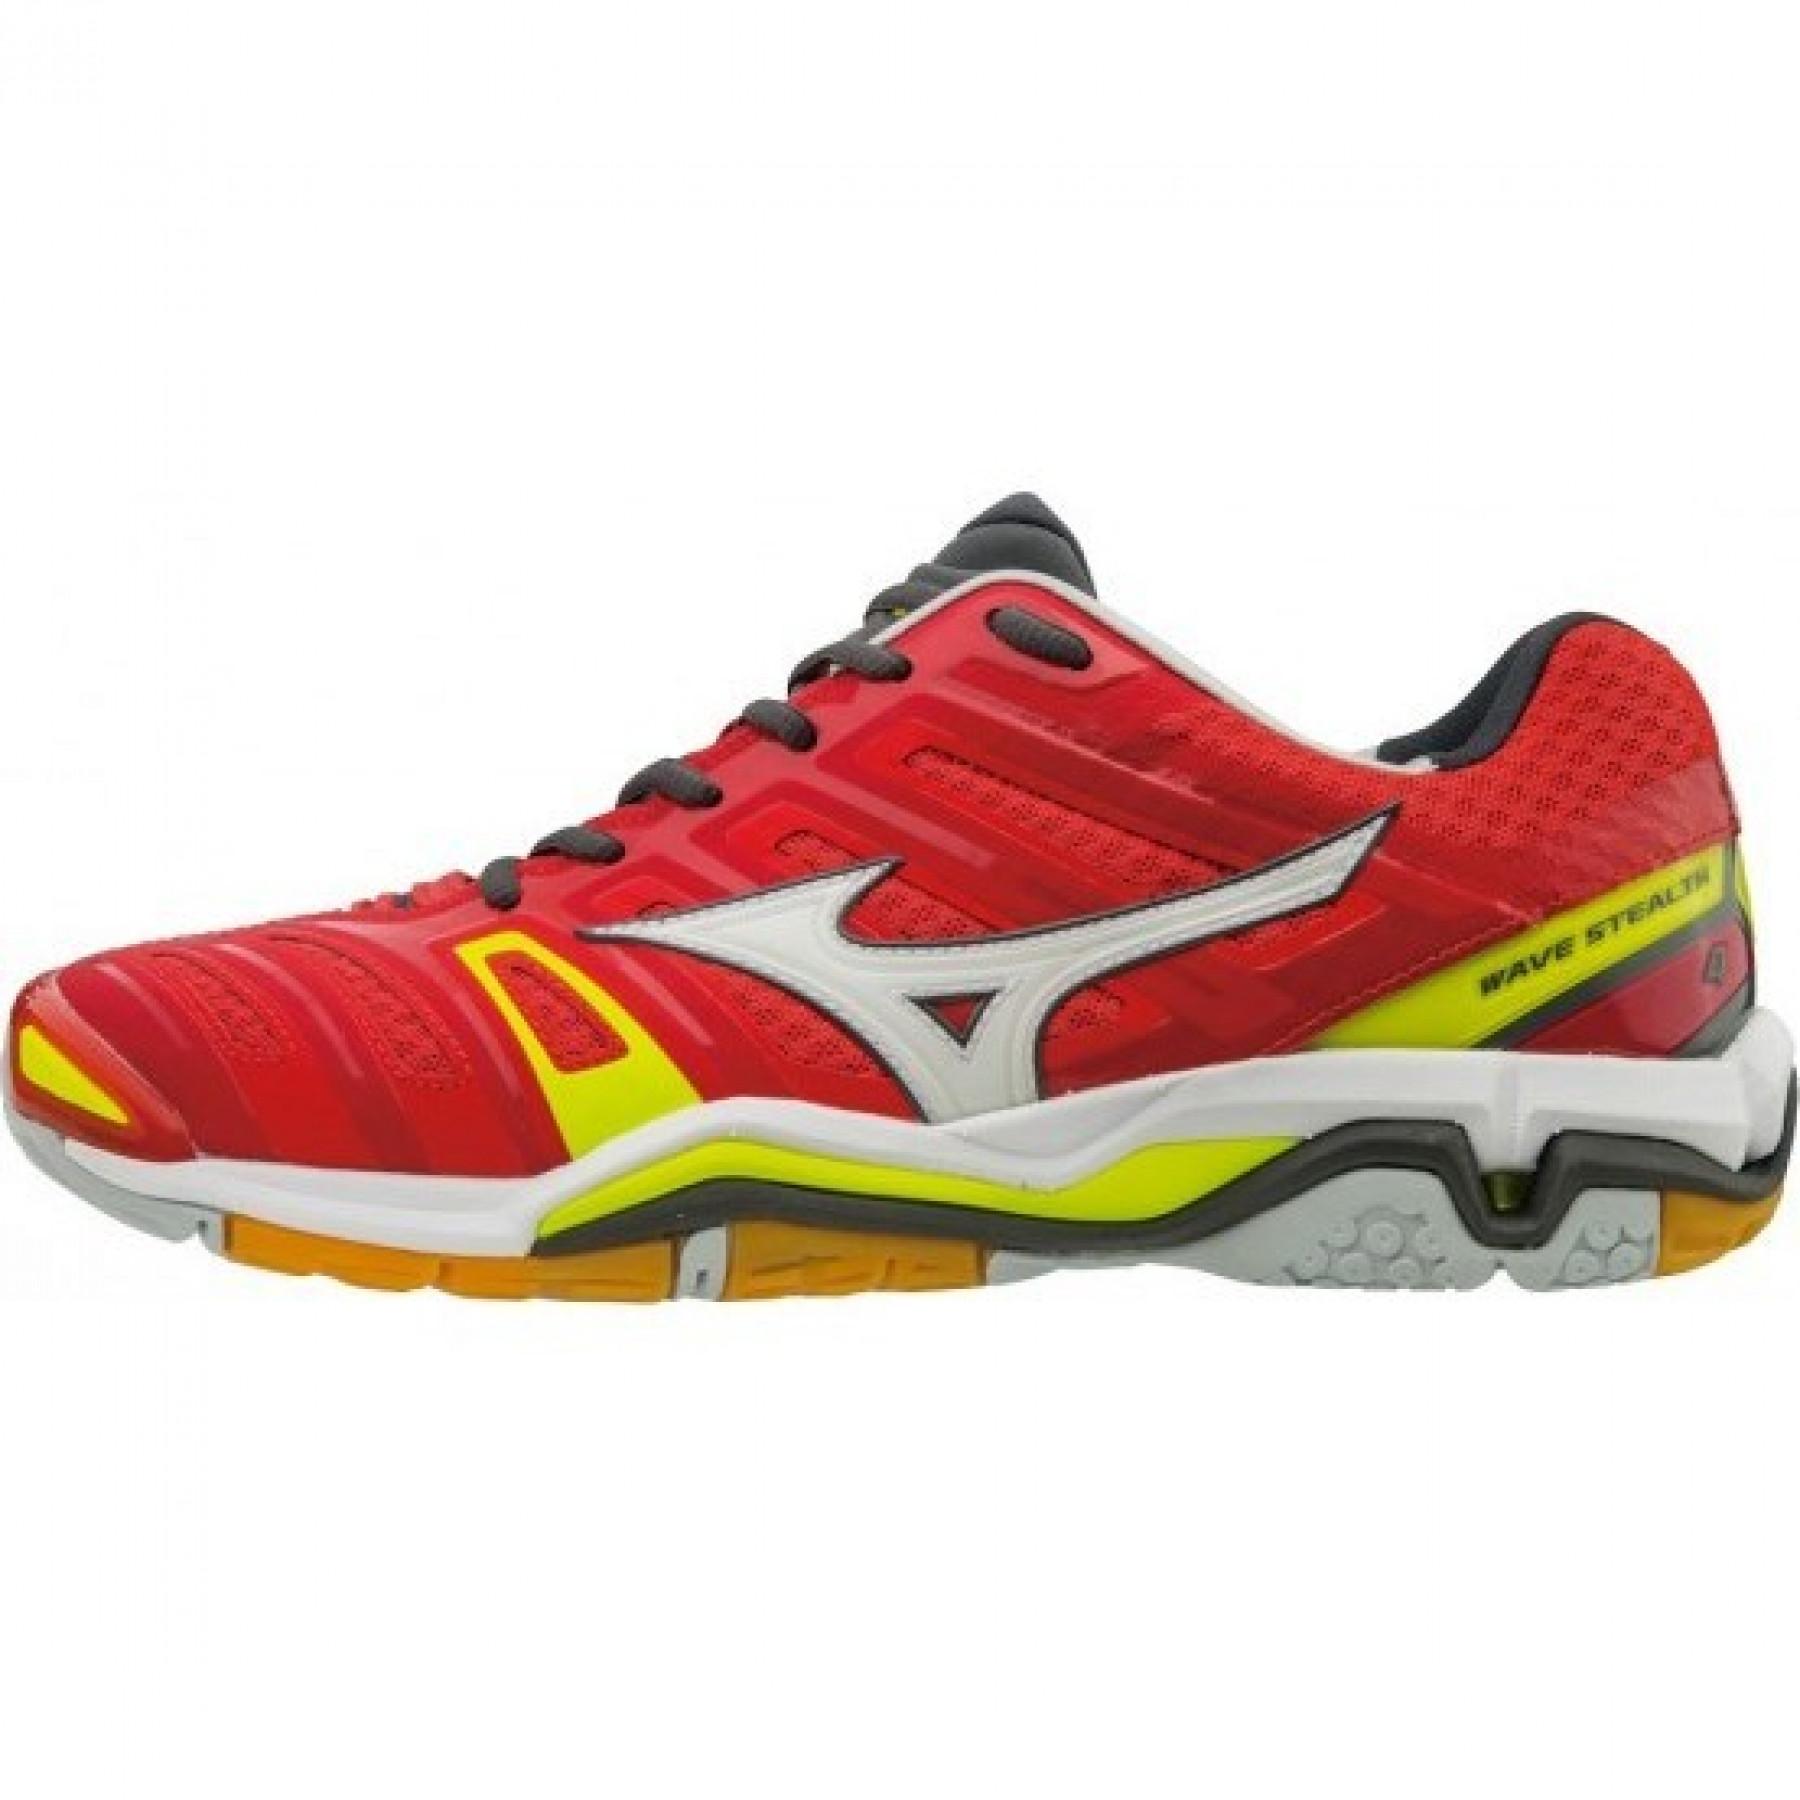 Mizuno Men's Wave Stealth 4 Mesh Athletic Court Sneakers Shoes